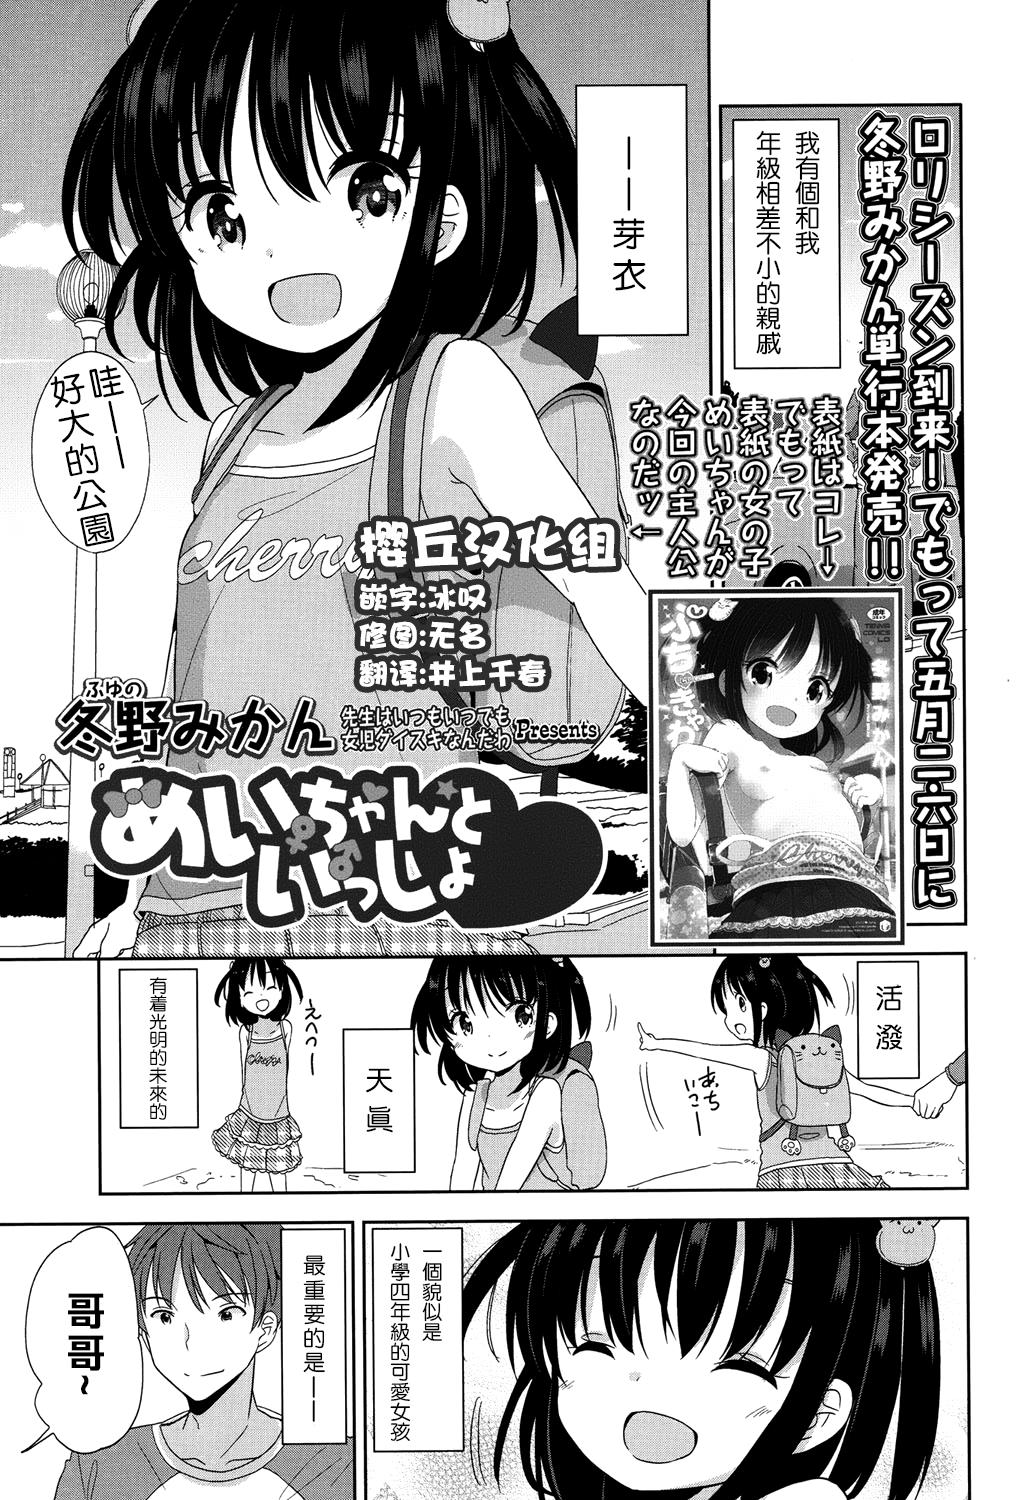 Kissing Mei-chan to Issho Couple - Page 1